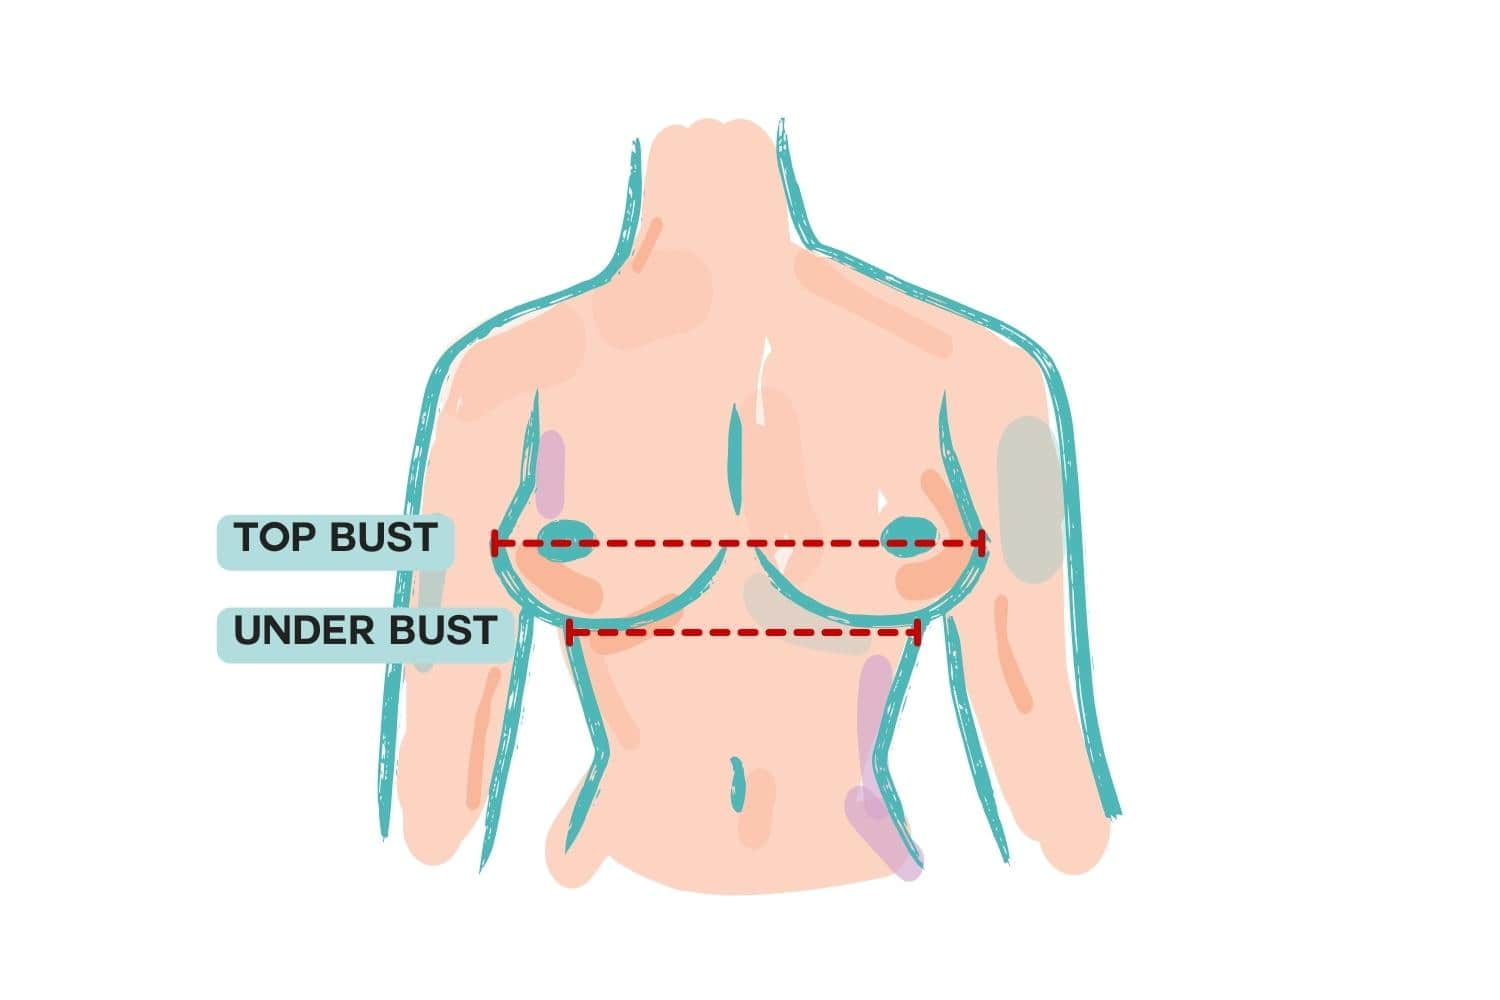 Image of a woman's body with breast, top bust, and under-bust measurements indicated. TOMSCOUT Chest Binder Size Guide